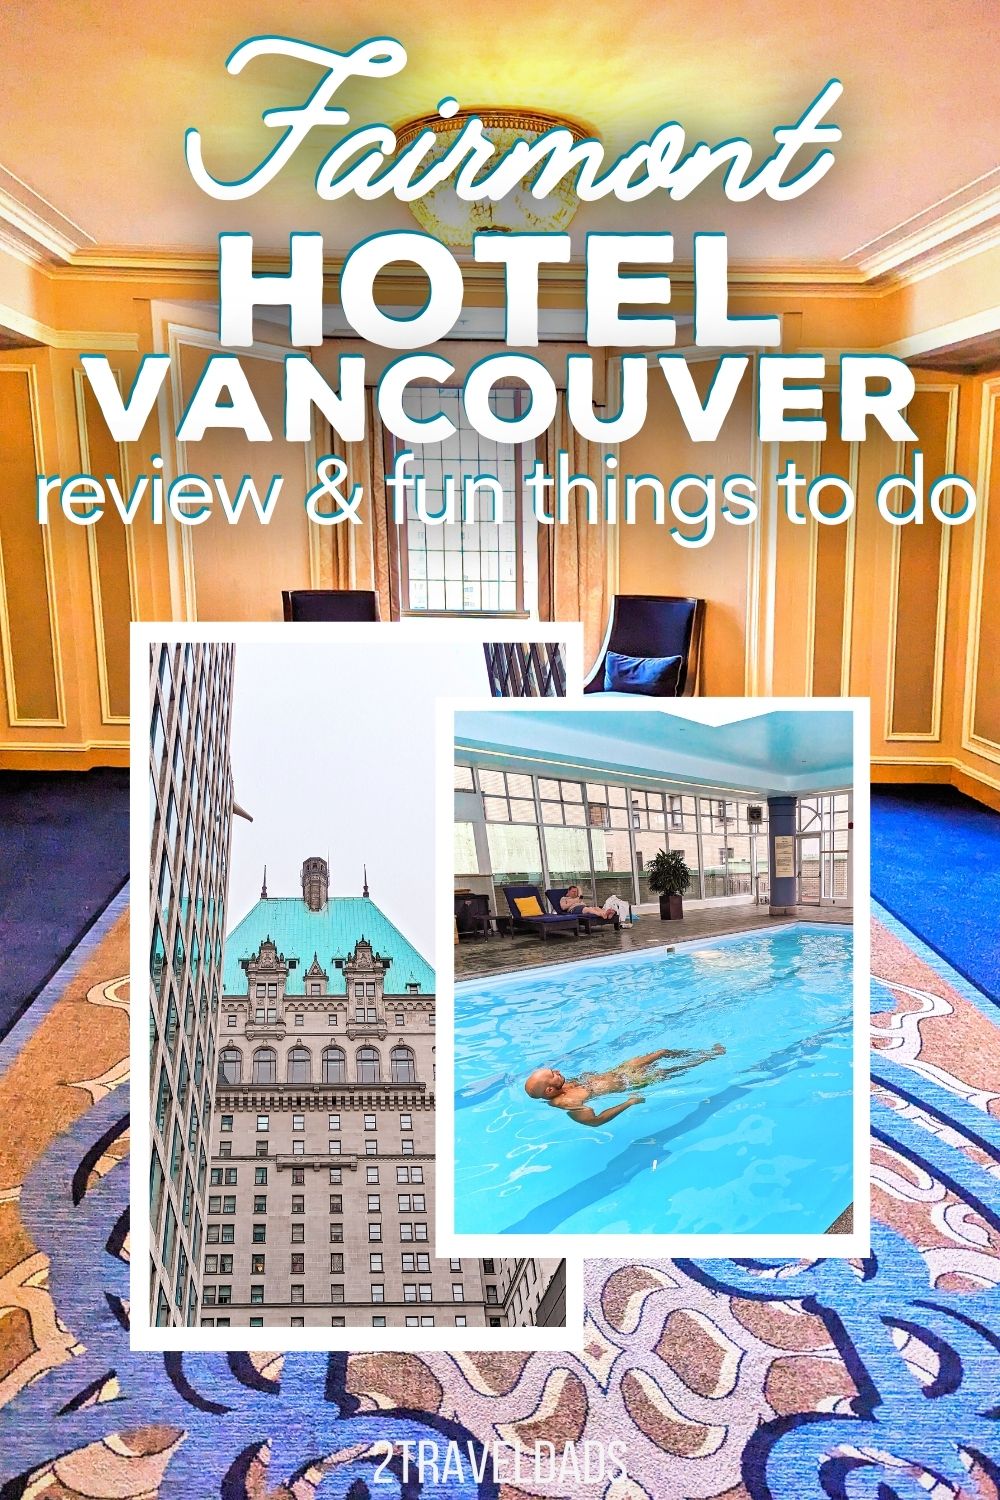 Review of the Fairmont Hotel Vancouver, from room types to things to do in Vancouver BC. See what to expect of the rooms, dining and other amenities at this high end Vancouver hotel.